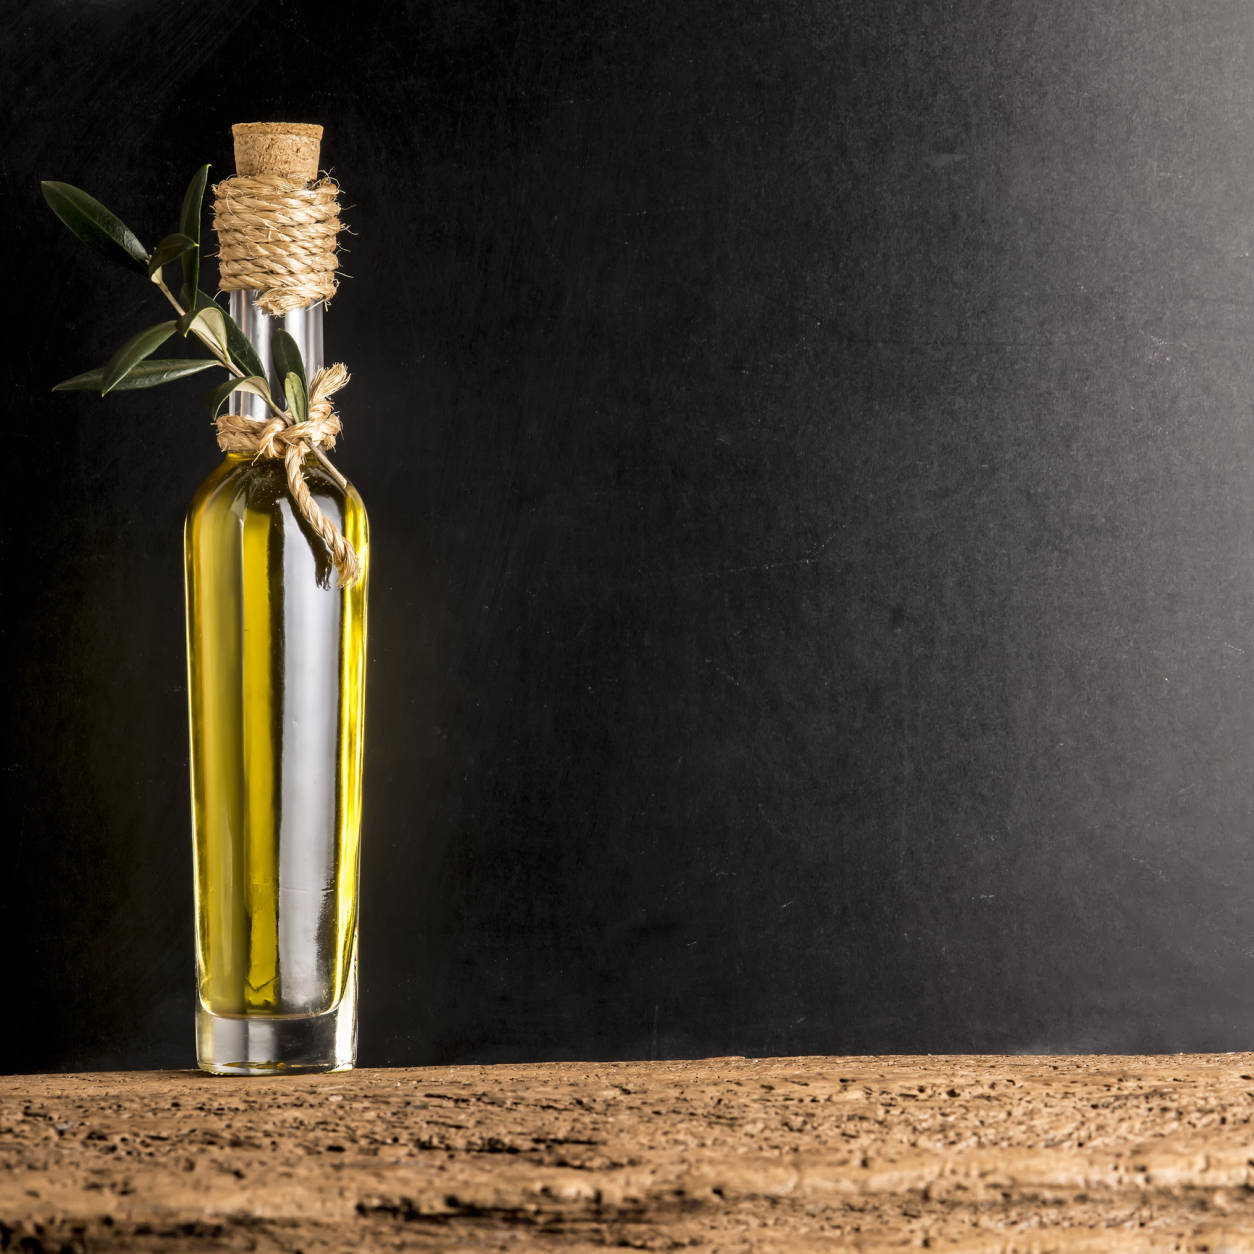 Extra virgin olive oil in rustic glass bottle on rustic background